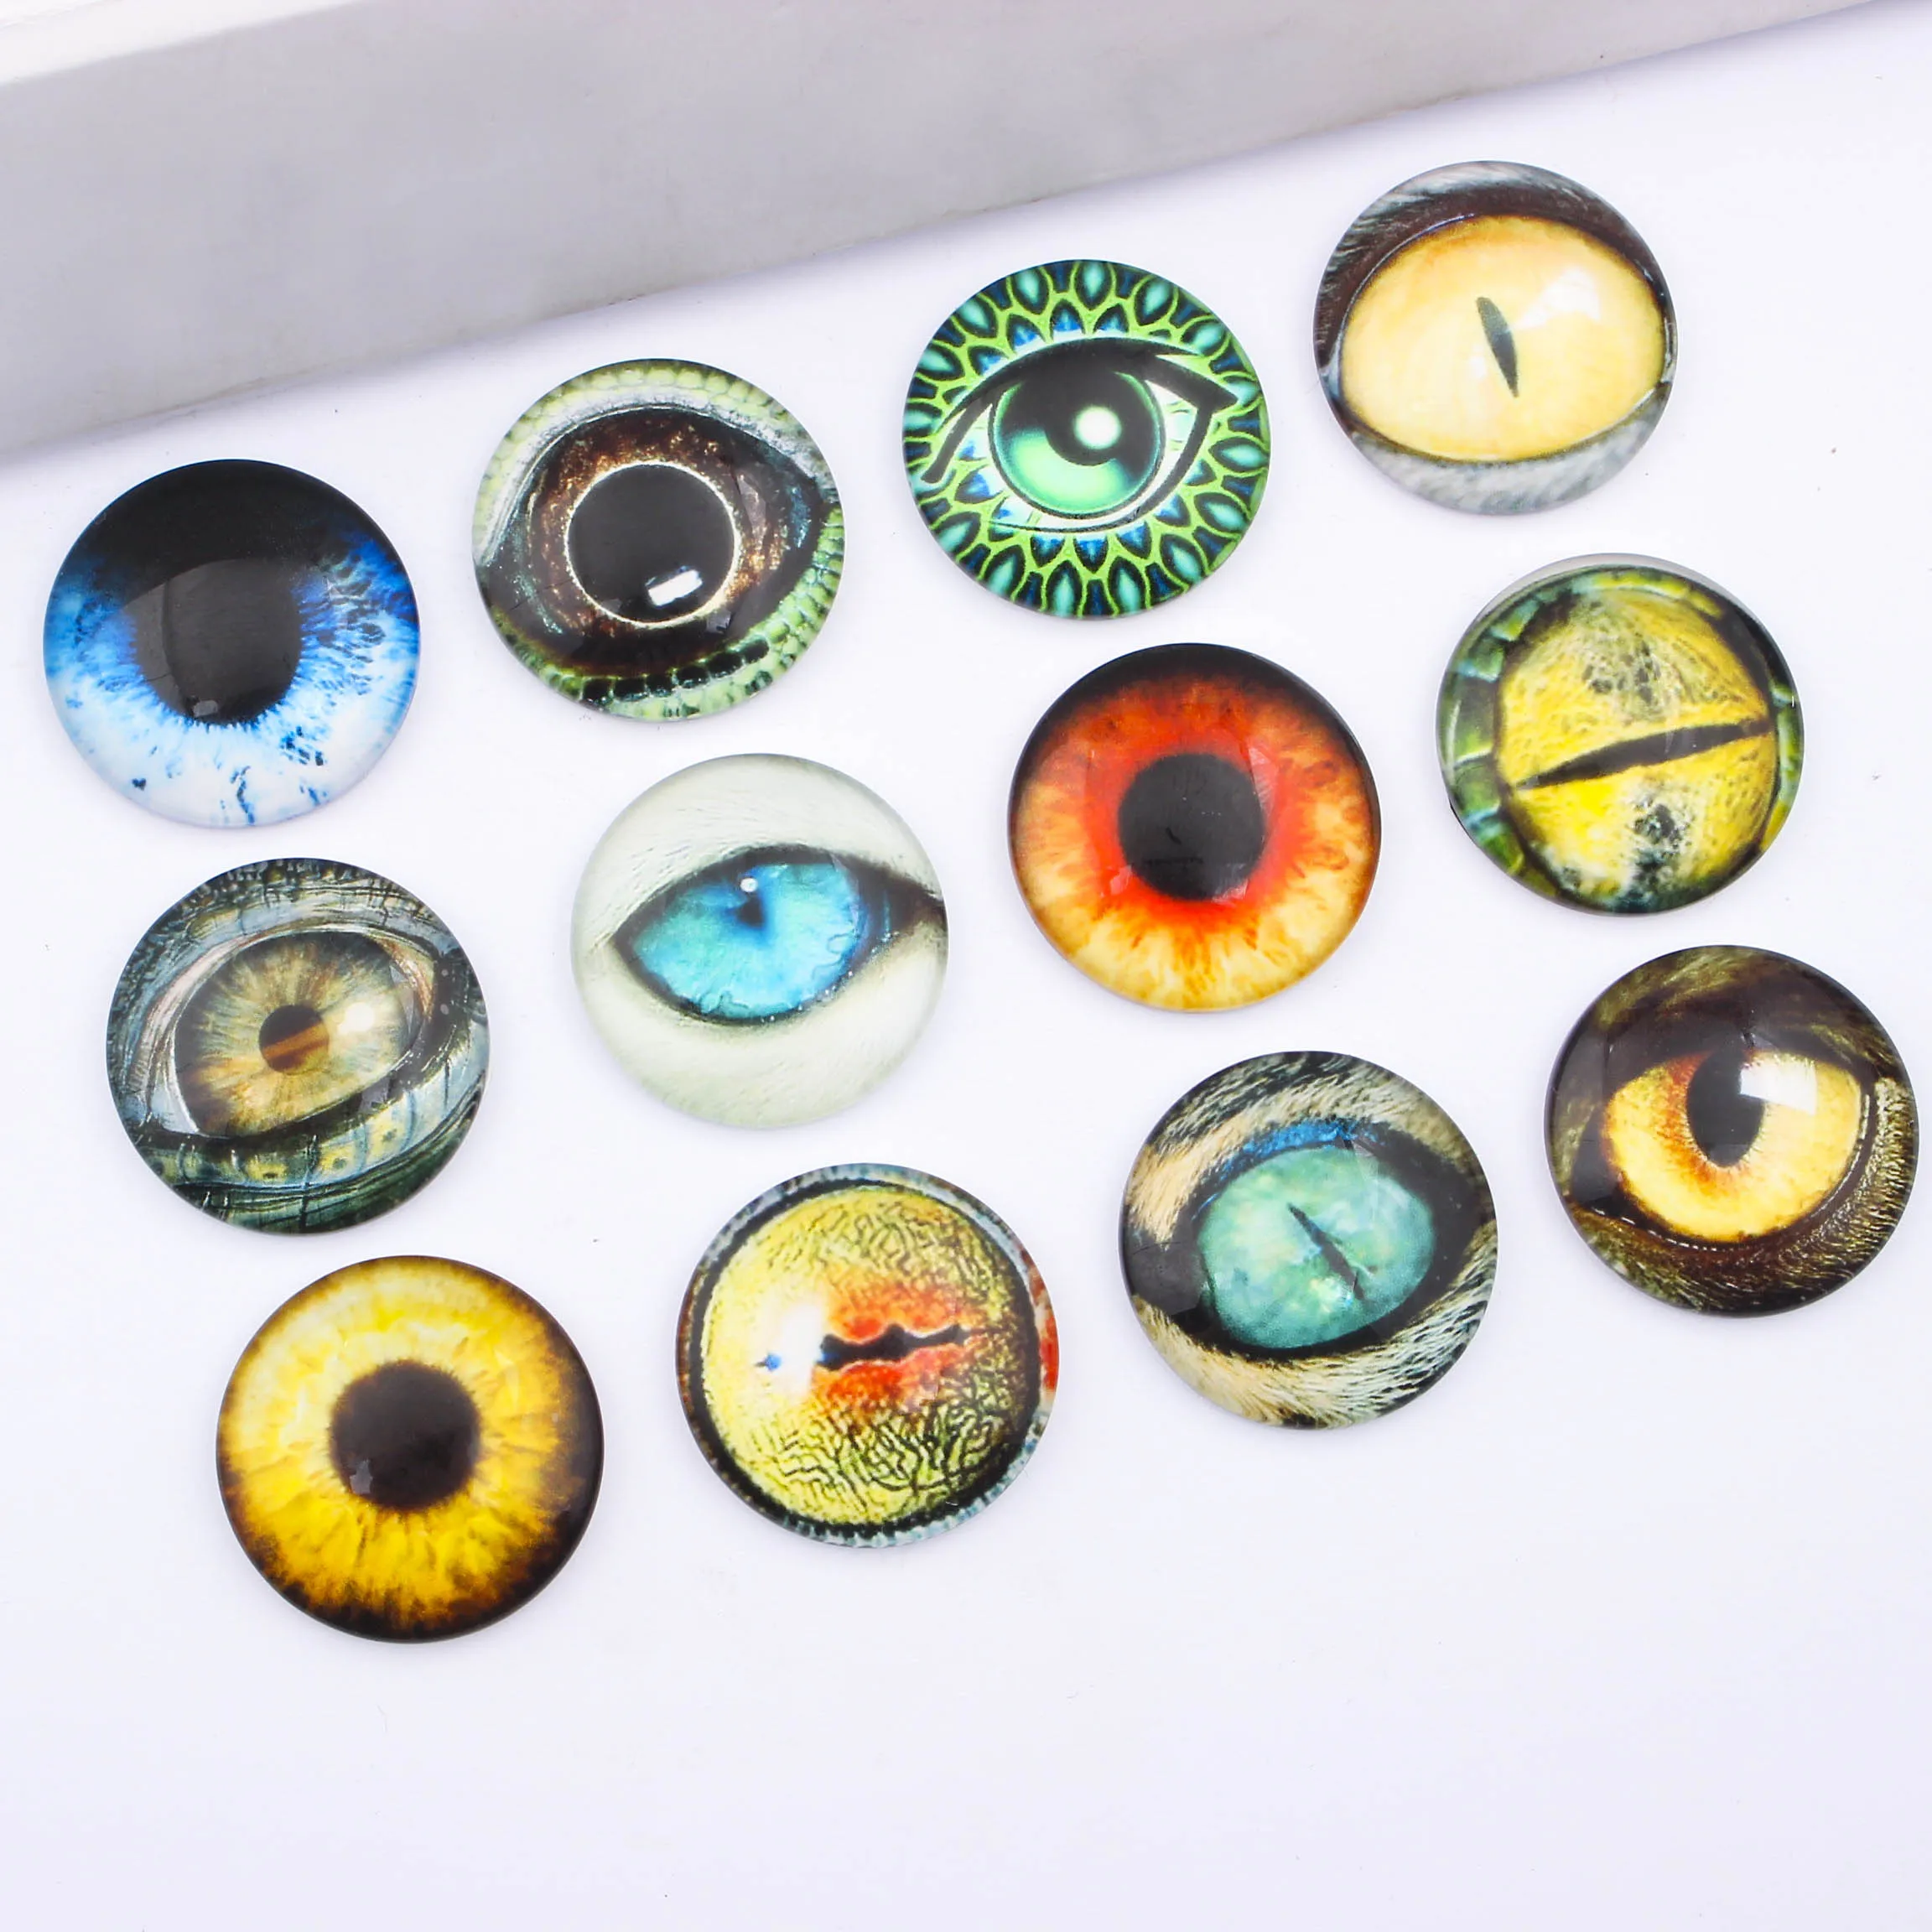 Image Glass Cabochon 8mm 10mm Round cabochons 14mm 18mm,20mm,25mm 30mm Glass cabochon -565 12m Handmade Photo Glass Cabochon